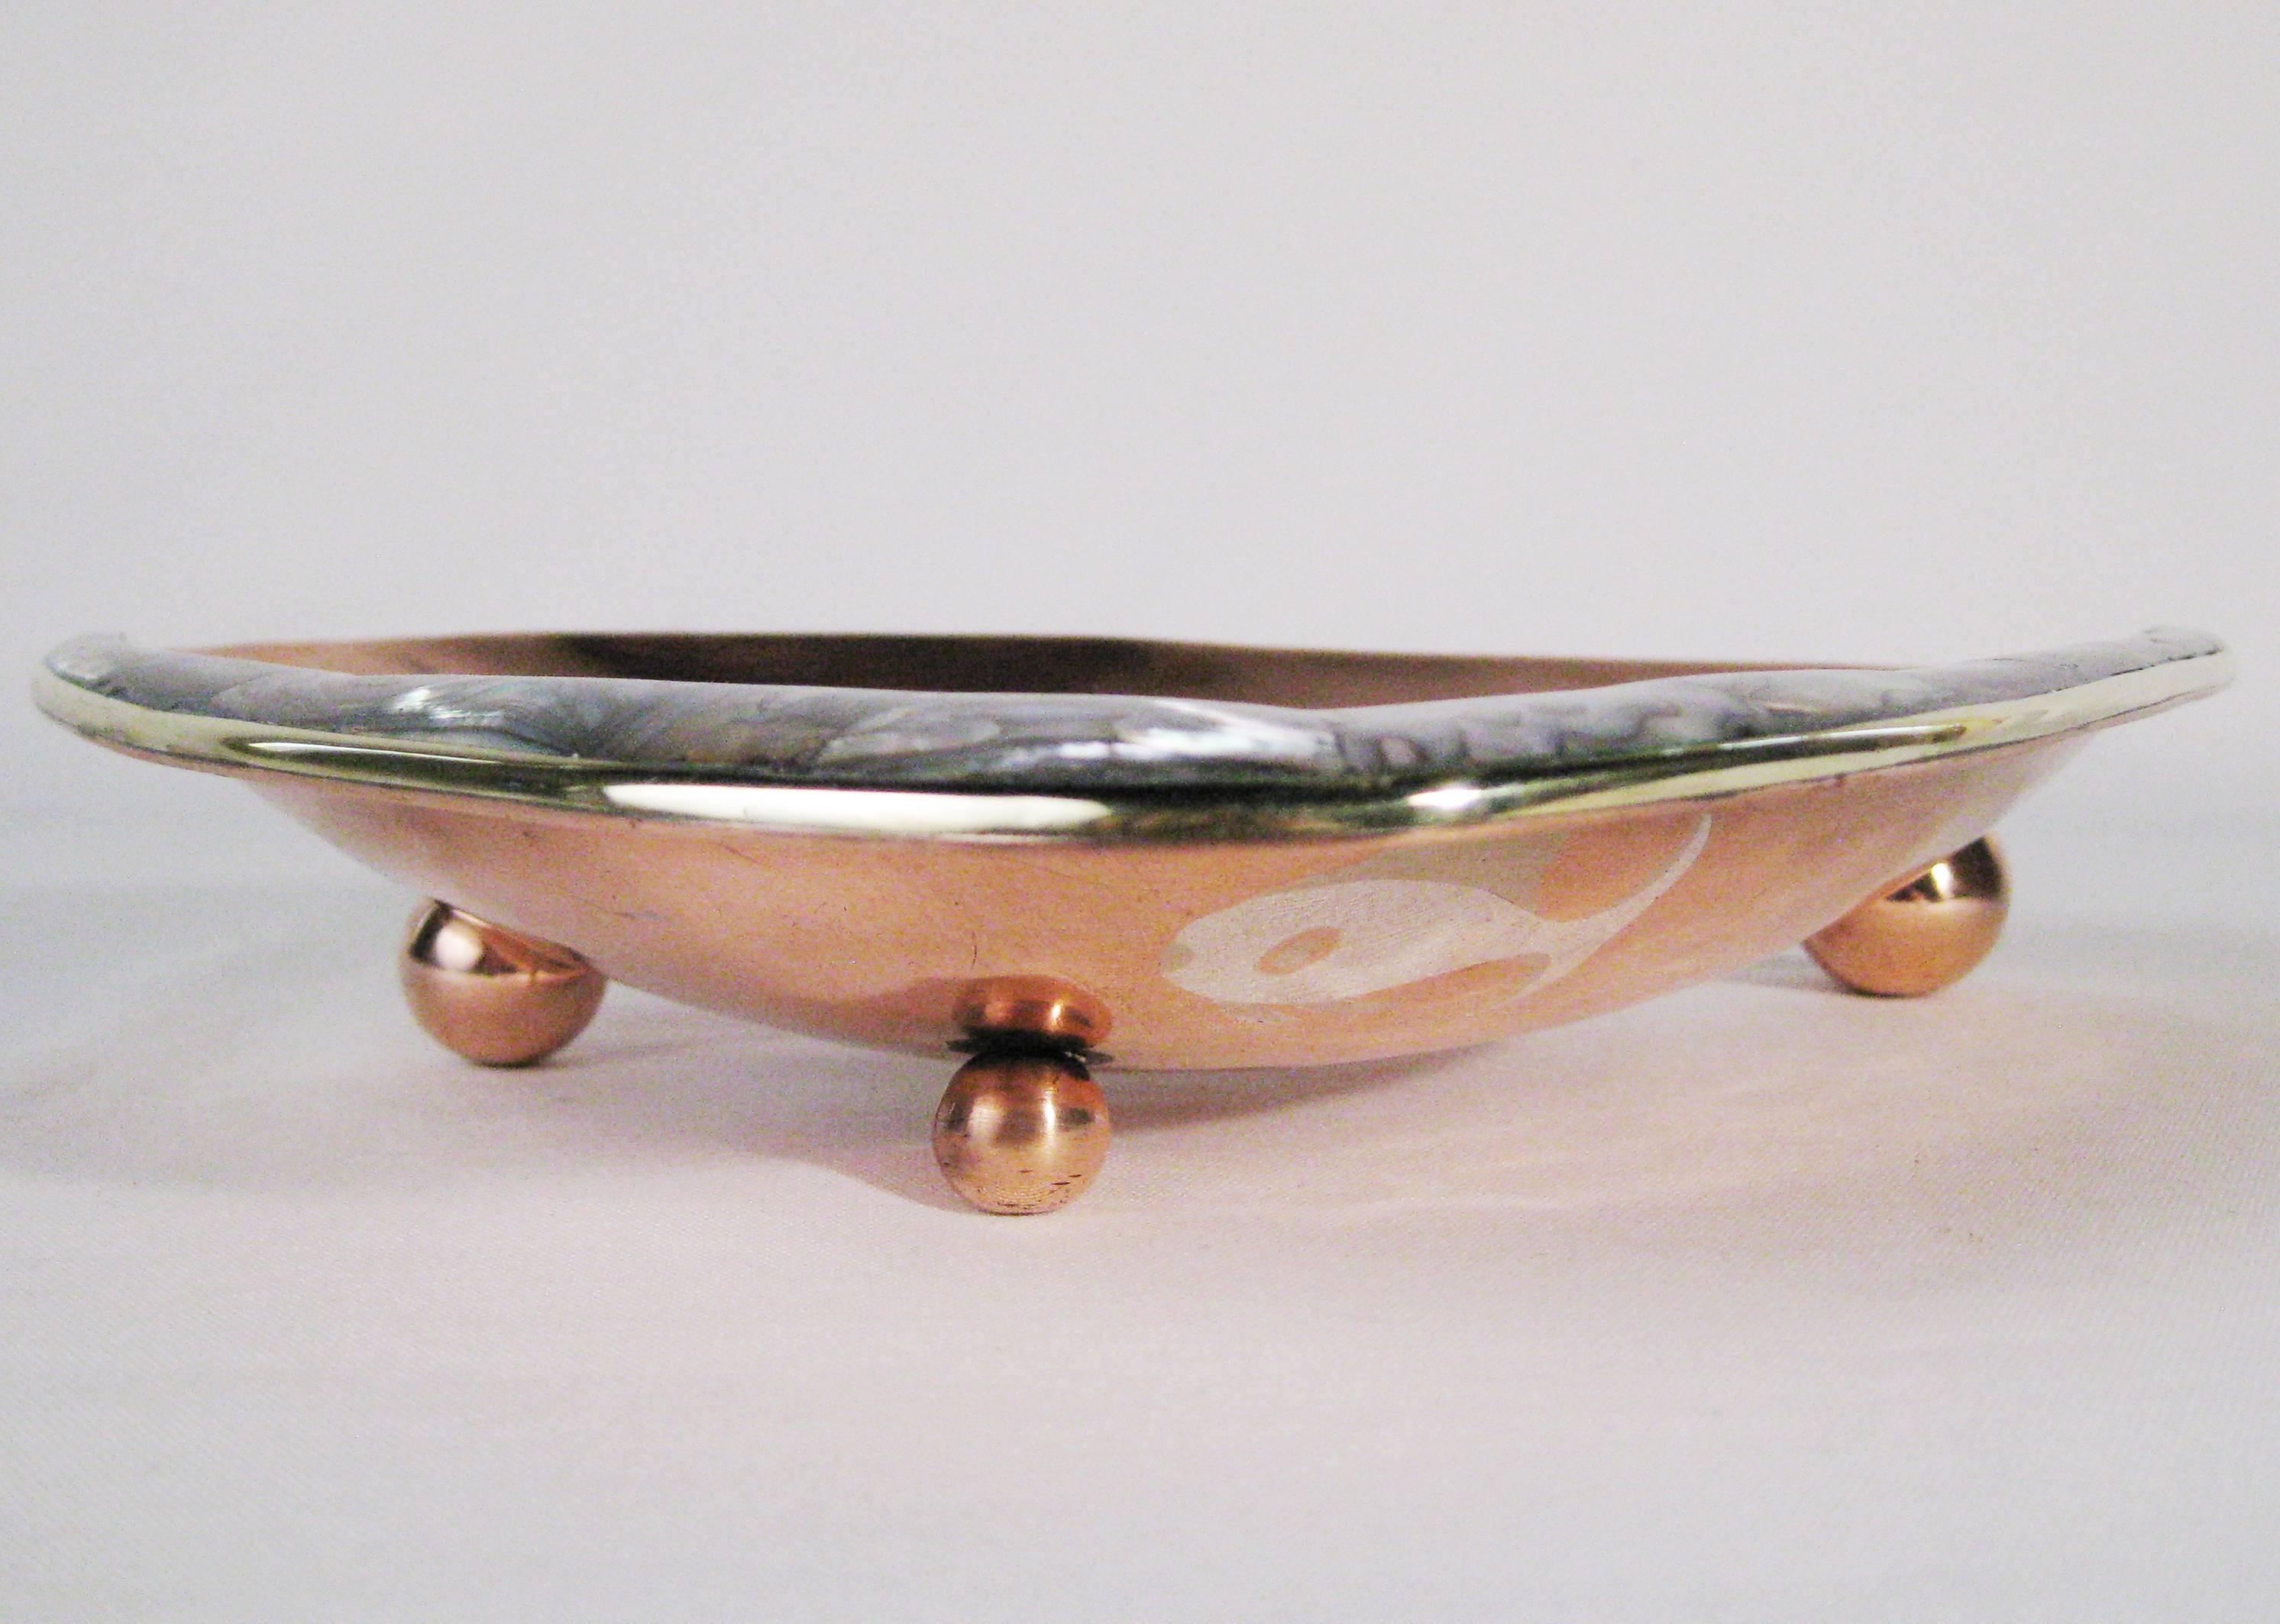 Antonio Castillo began his storied career in silversmithing by working for William Spratling before founding 